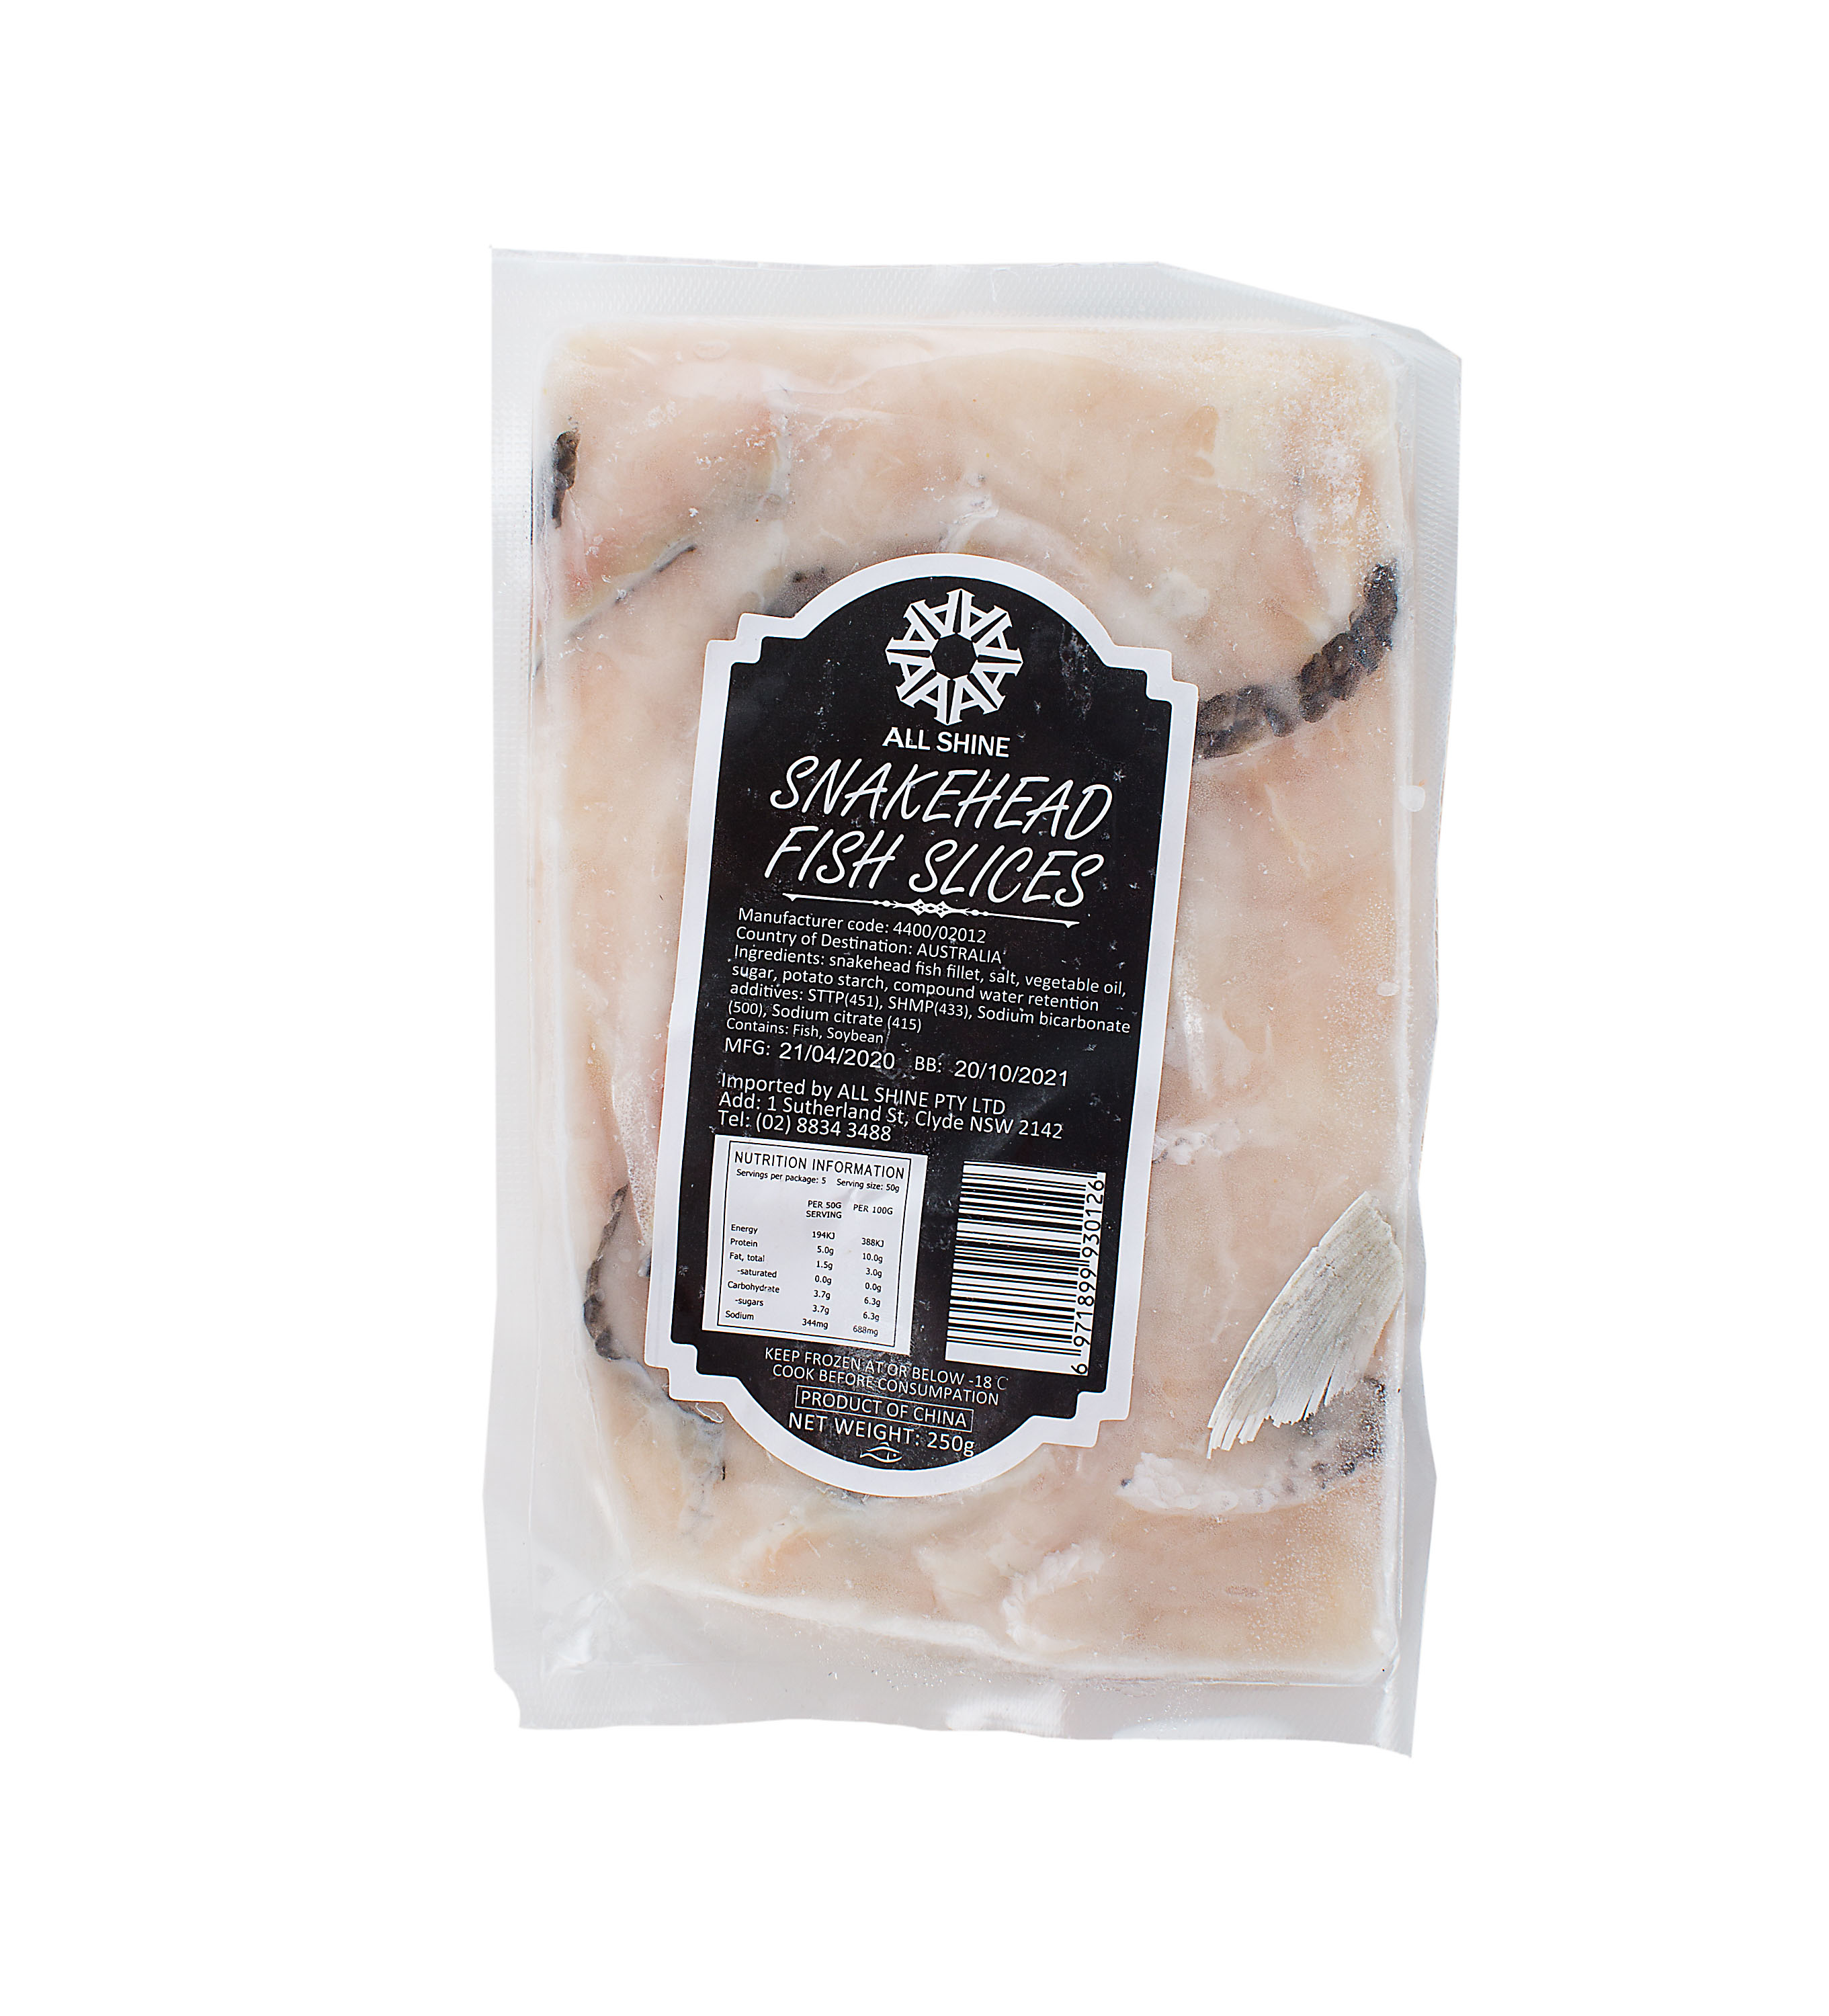 Black Fish Fillet Slices 250g-eBest-Weekly Special,Fish,Seafood